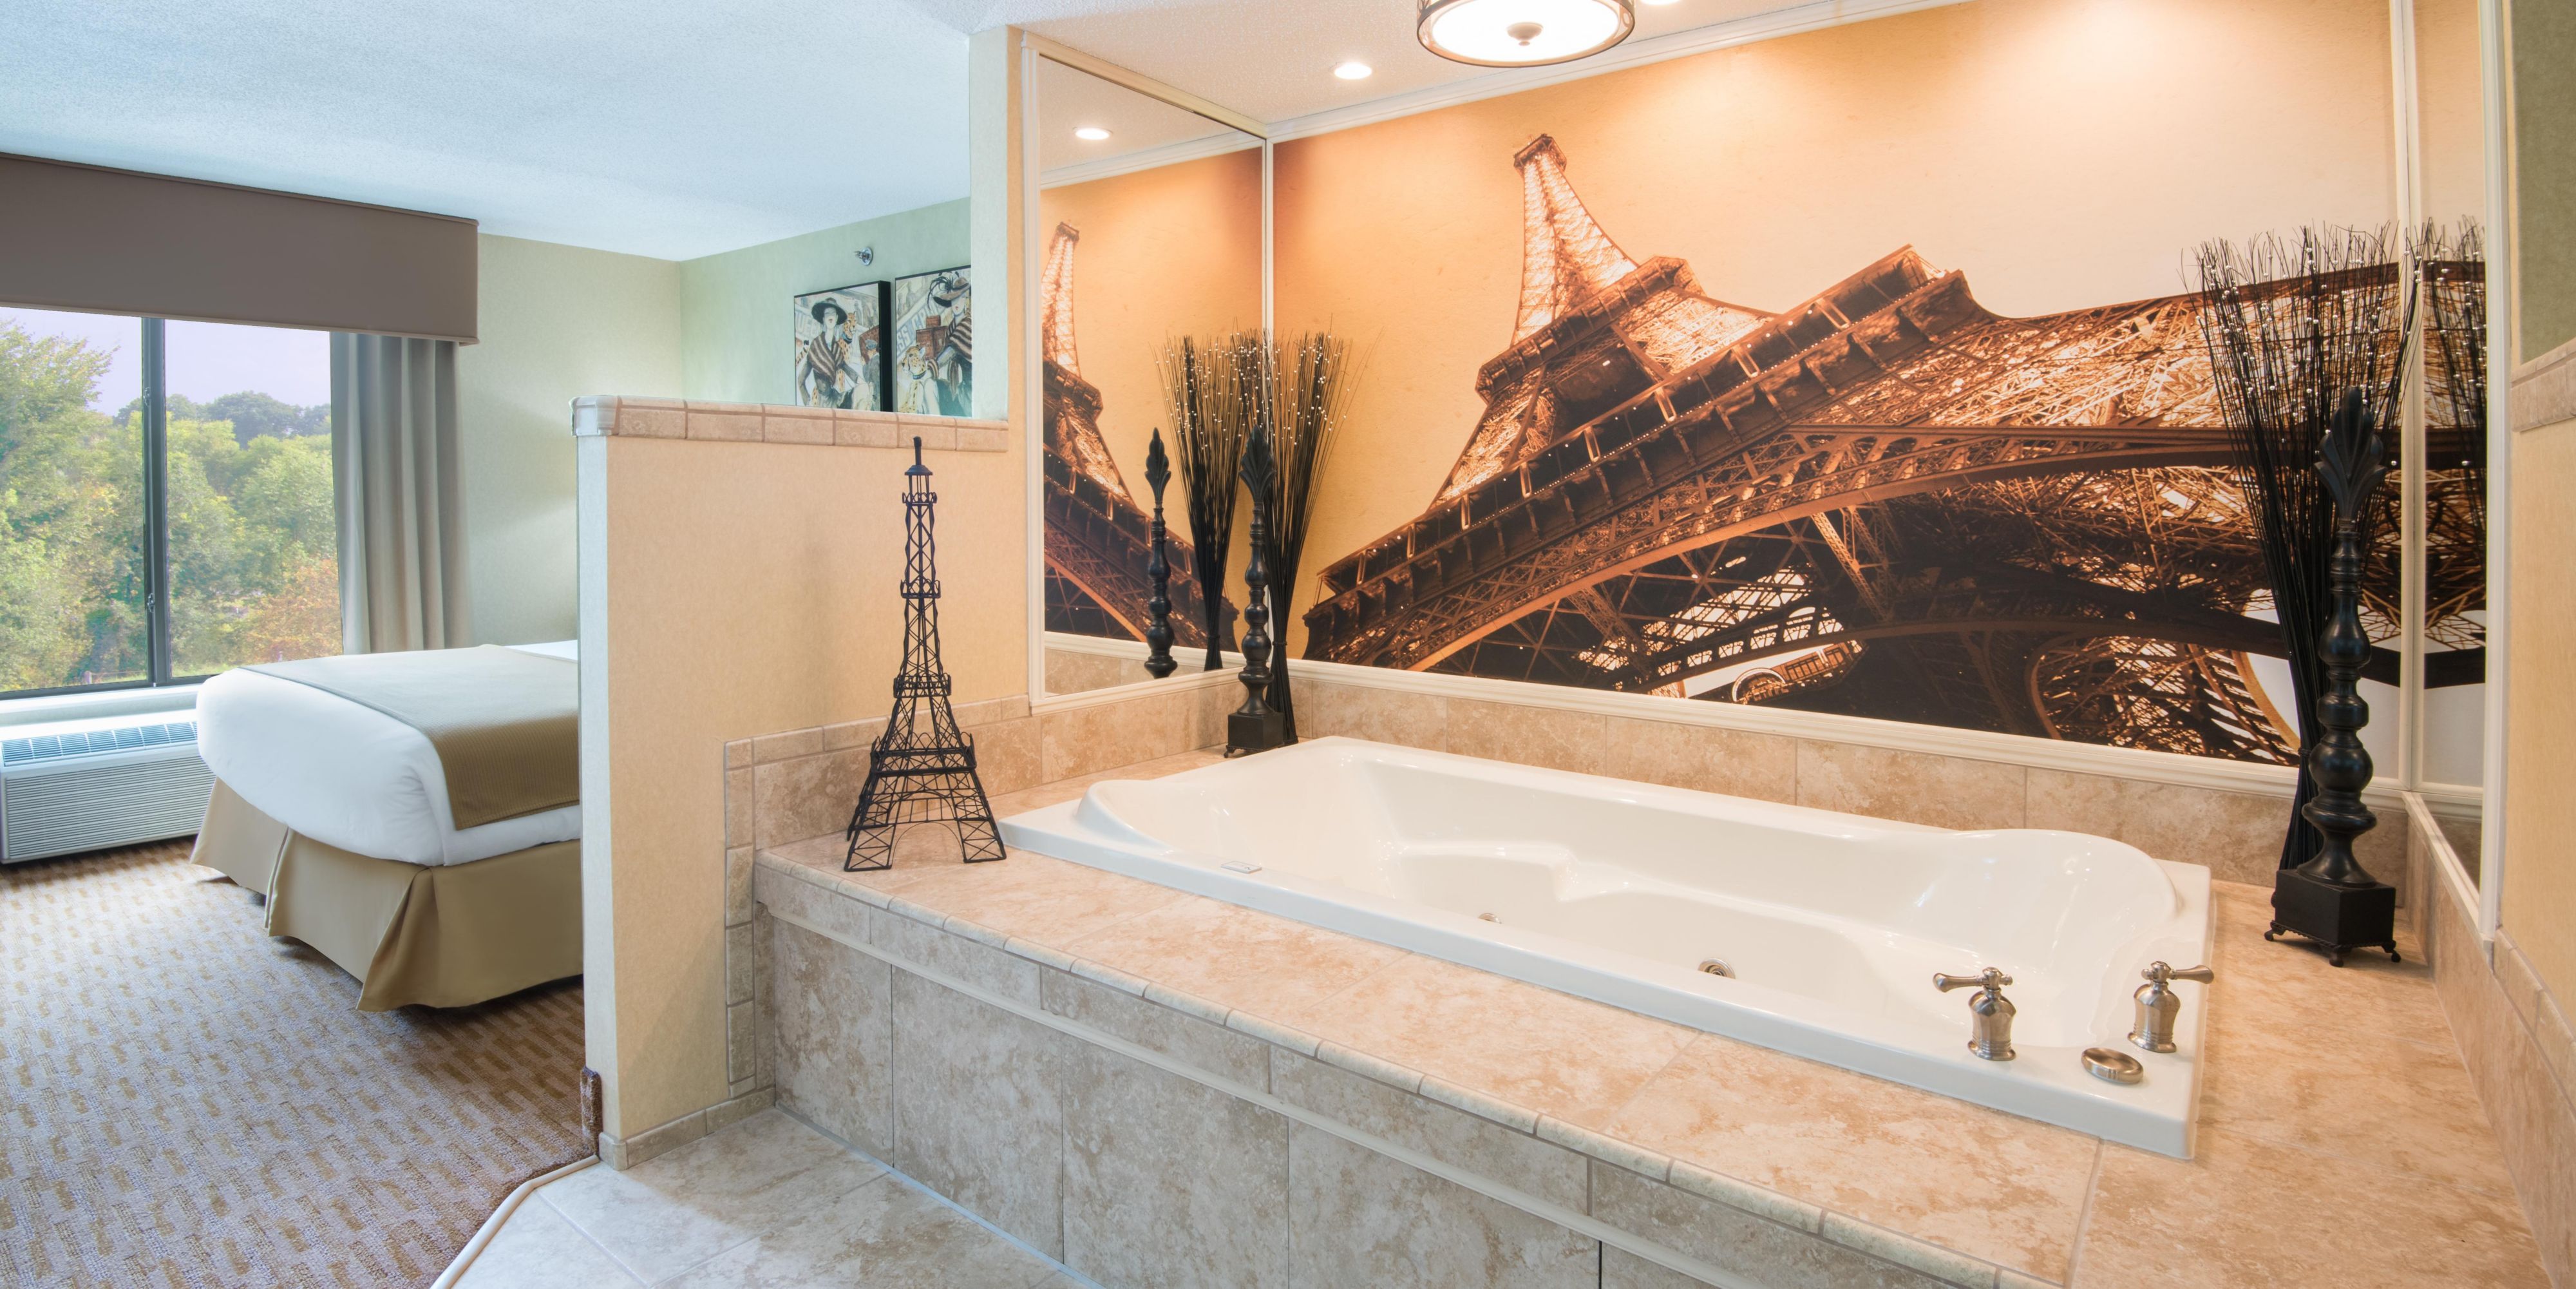 We offer a wide variety of specially designed rooms to give you a one of a kind hotel experience. Enjoy the amenities of our spacious Presidential, Executive, Paris, or one of our other uniquely themed suites.  